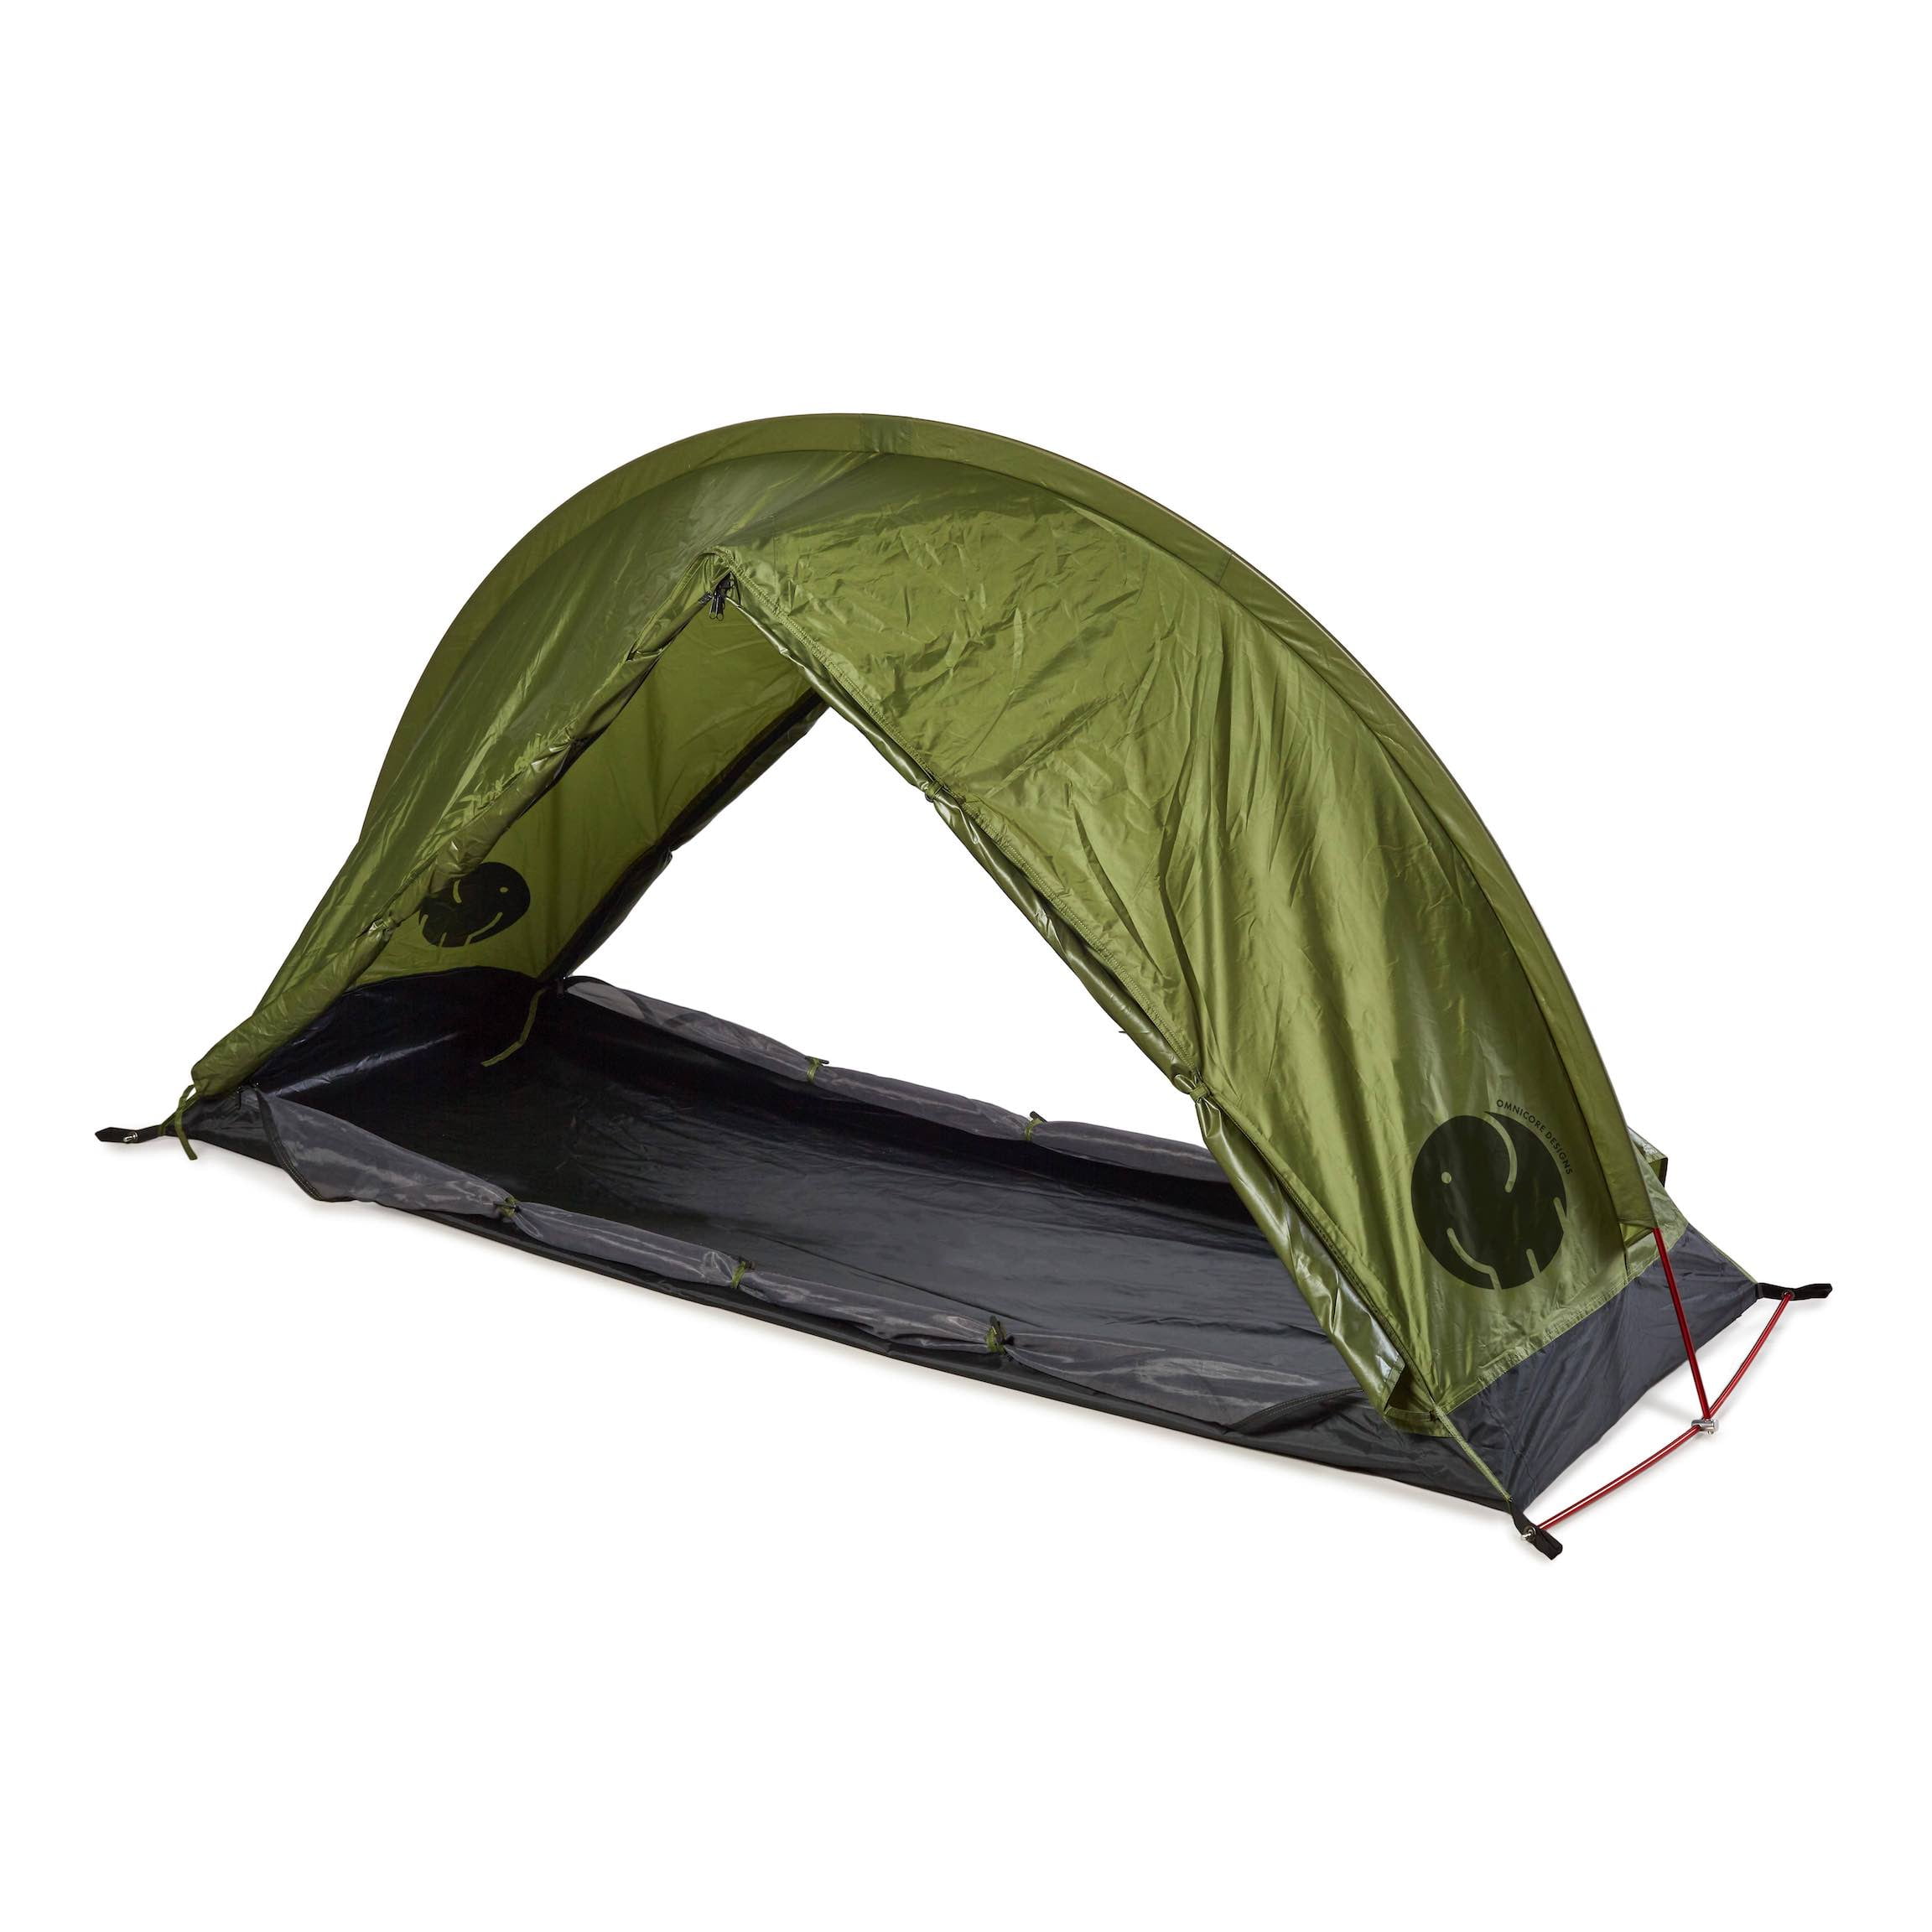 OmniCore Designs LINK2 2 Person UL Backpacking Tent - Walmart.com